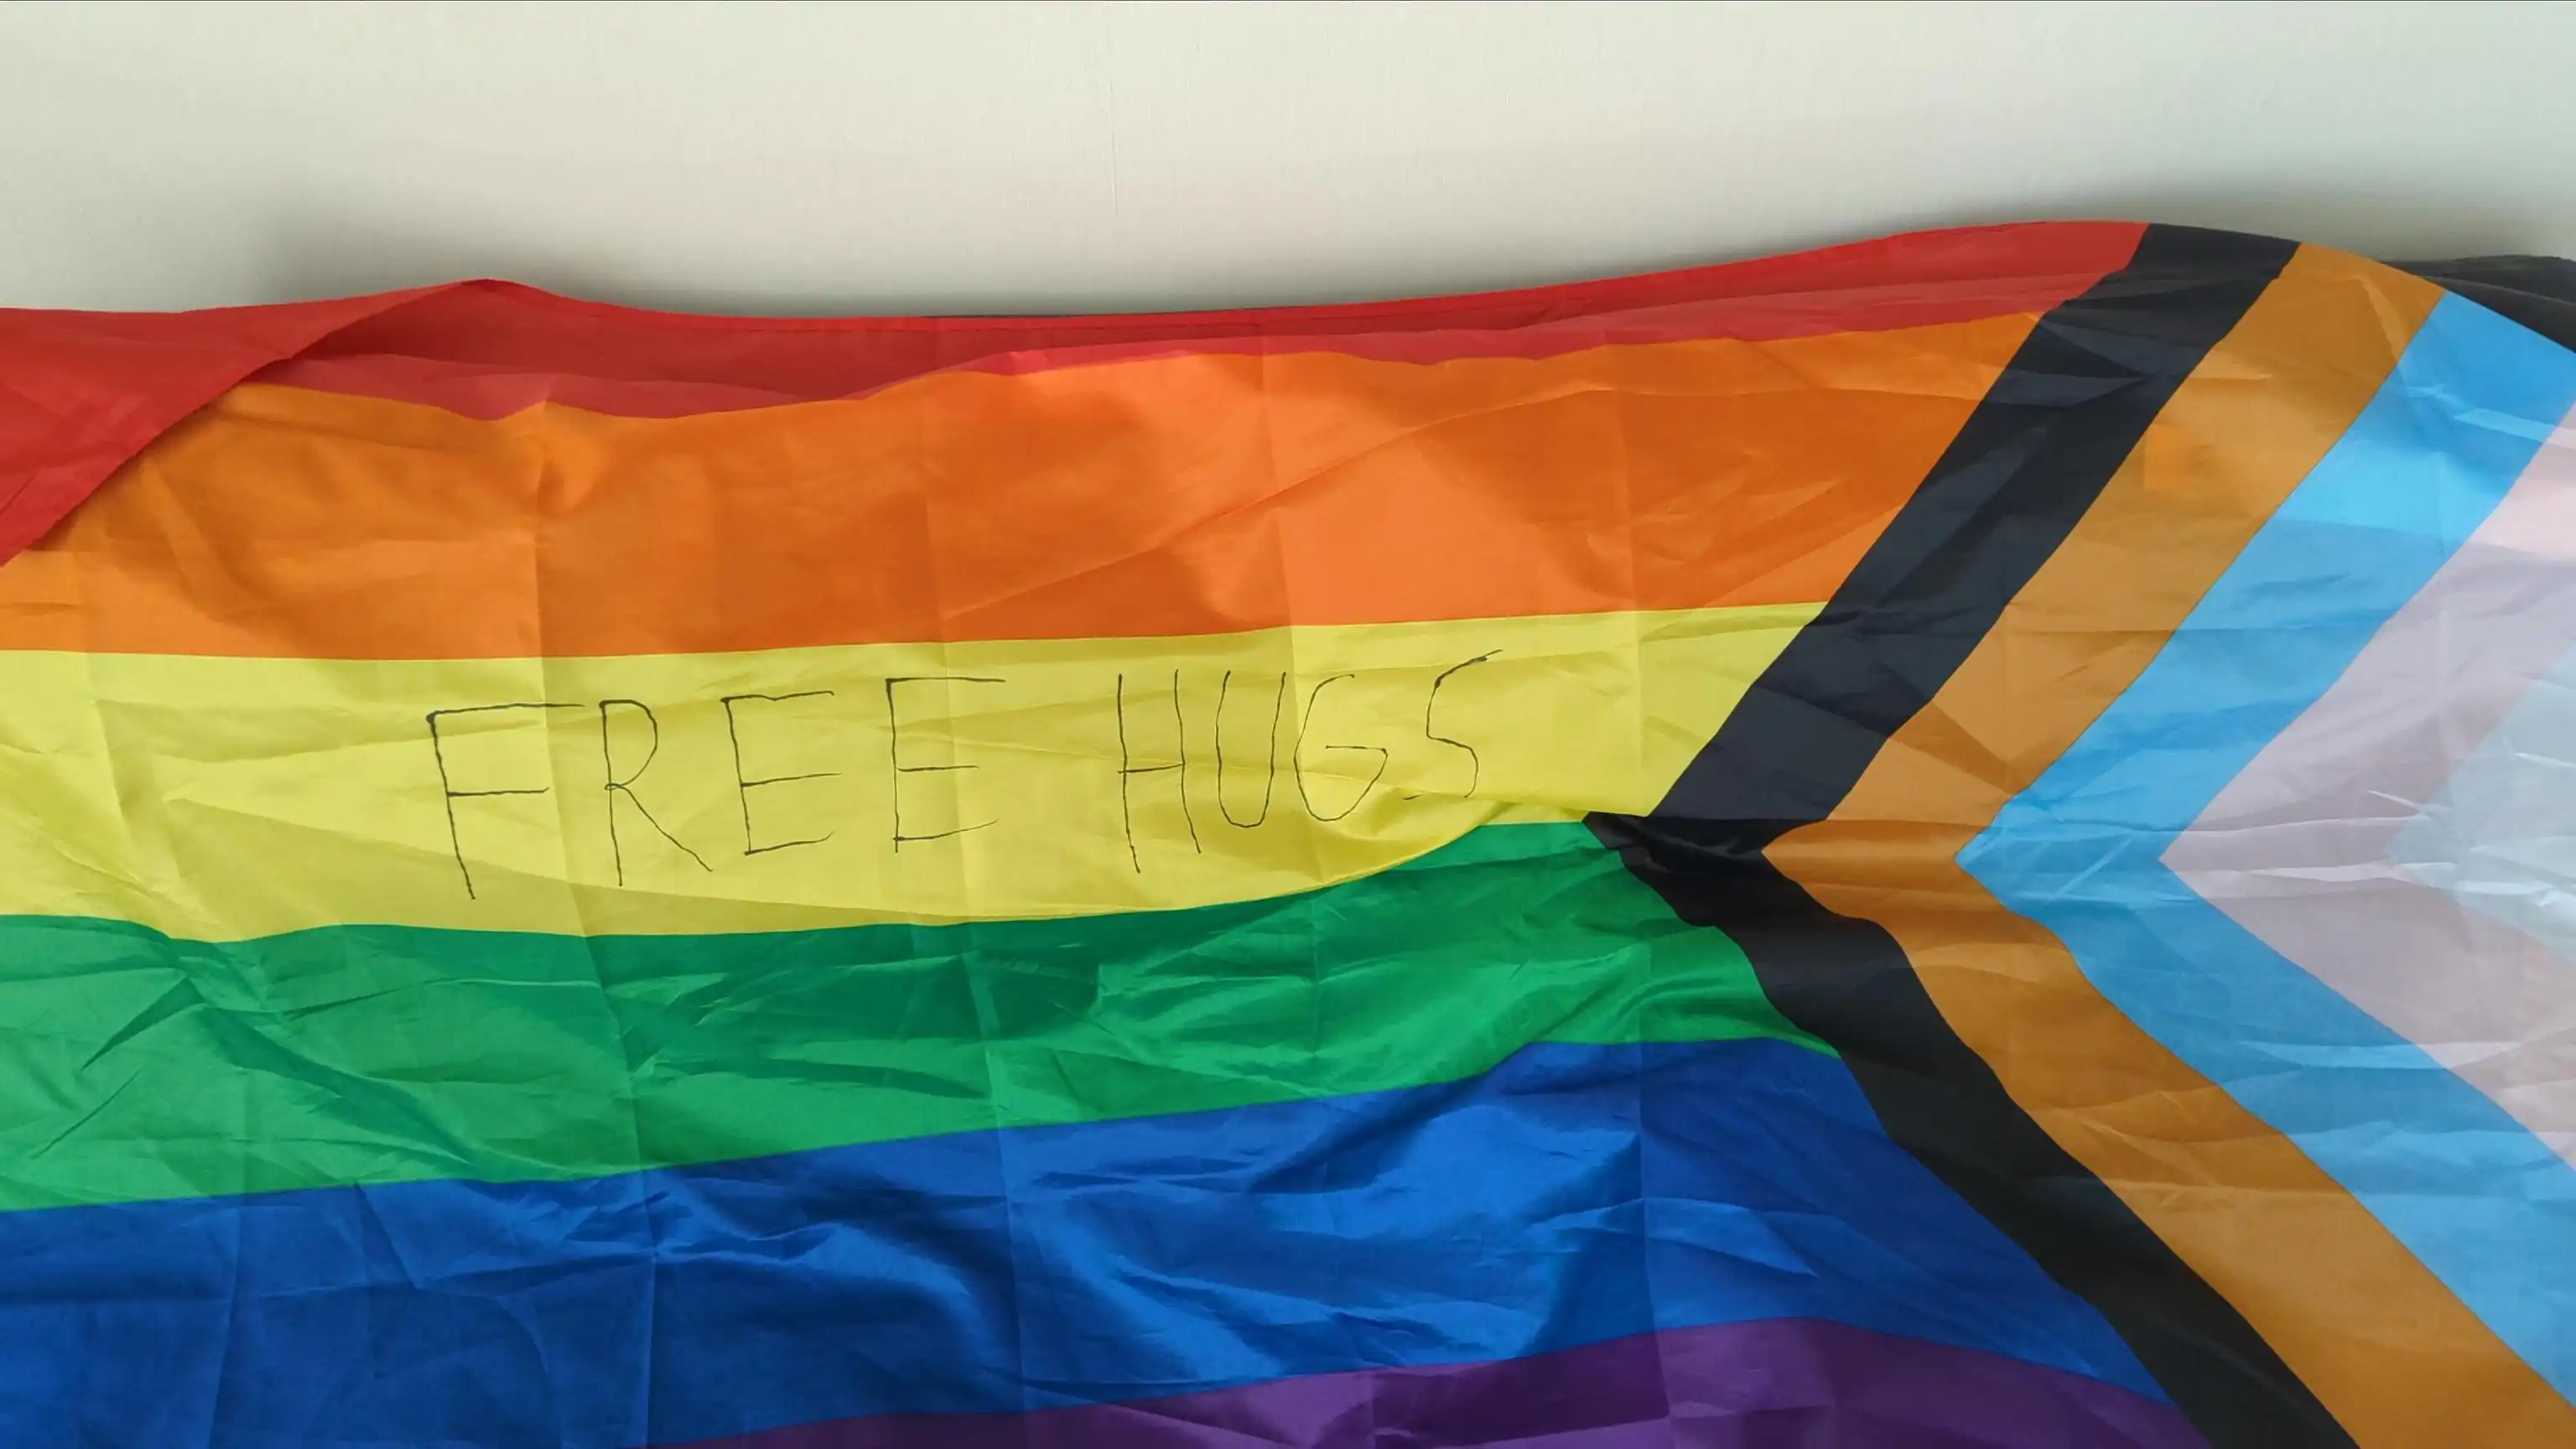 A progress flag with "FREE HUGS" written on in black on the yellow stripe